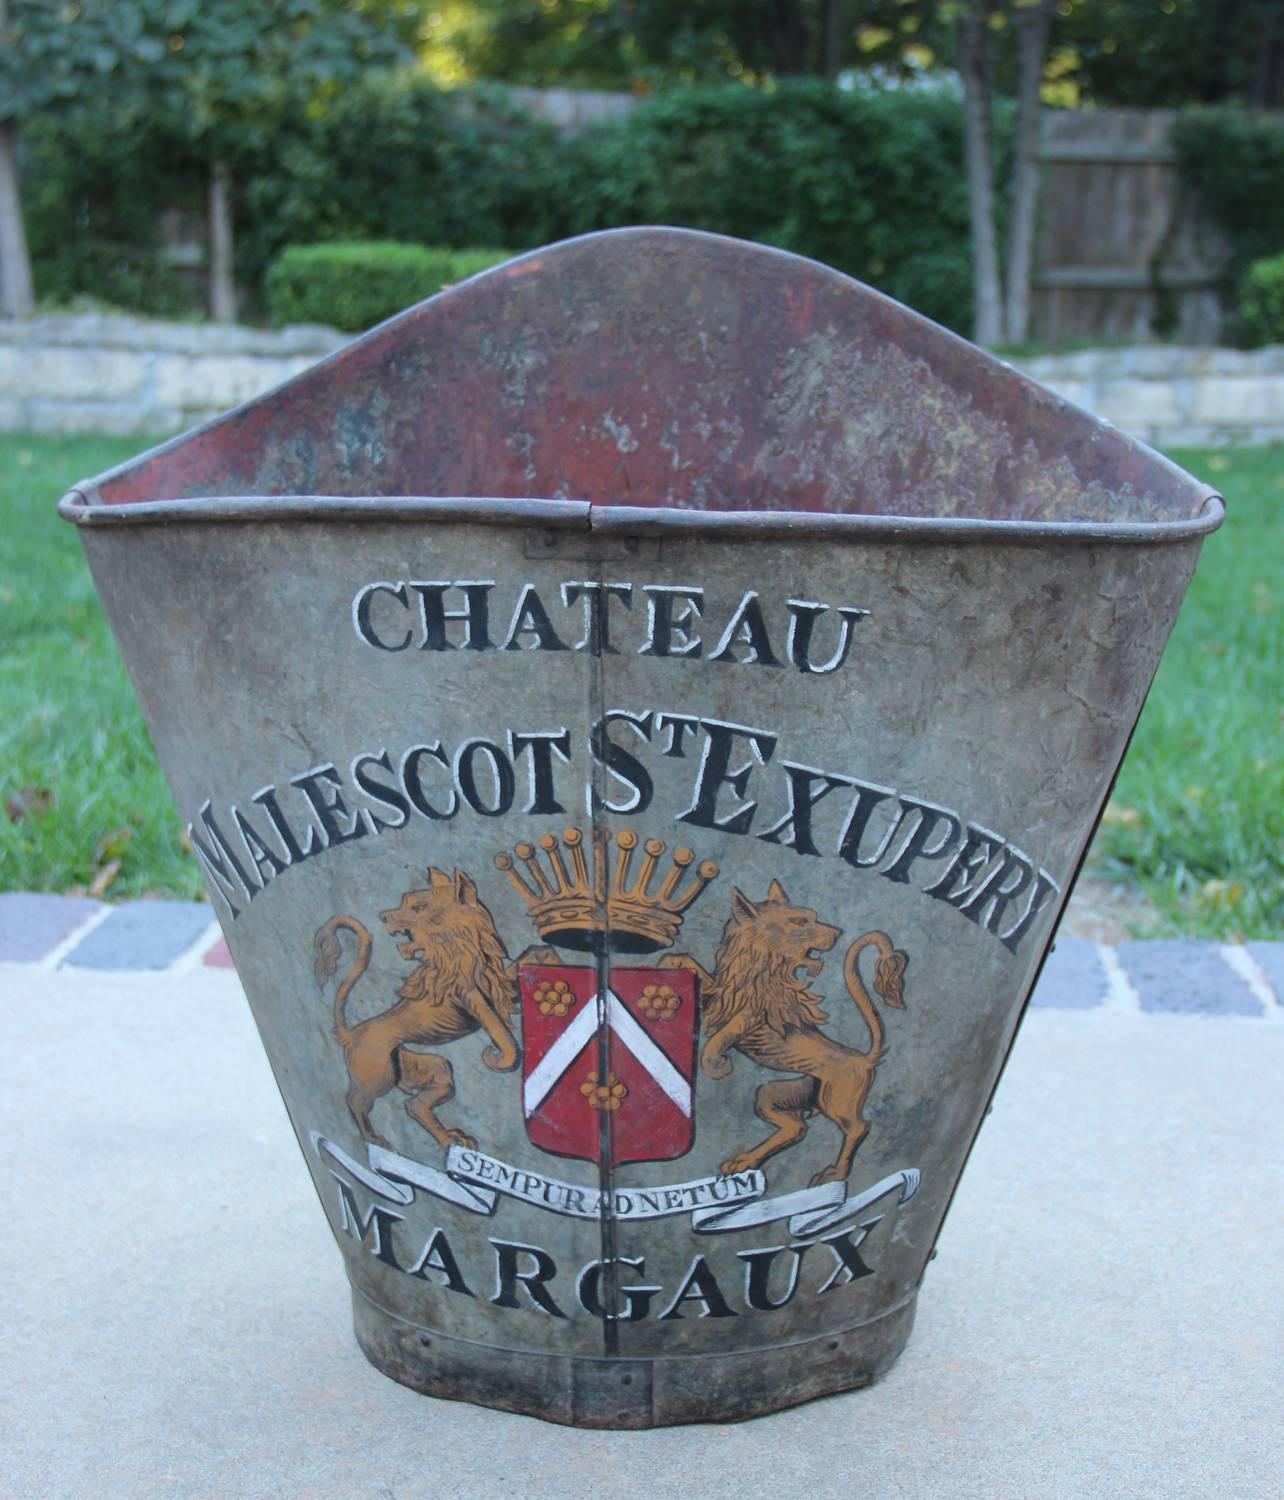 Late 19th century French zinc grape hod with back straps. These beautiful French grape hods were once used for picking grapes. This hod displays the Château Malescot St. Exupéry vineyard cote of arms from the Bordeaux region of France. 

These grape